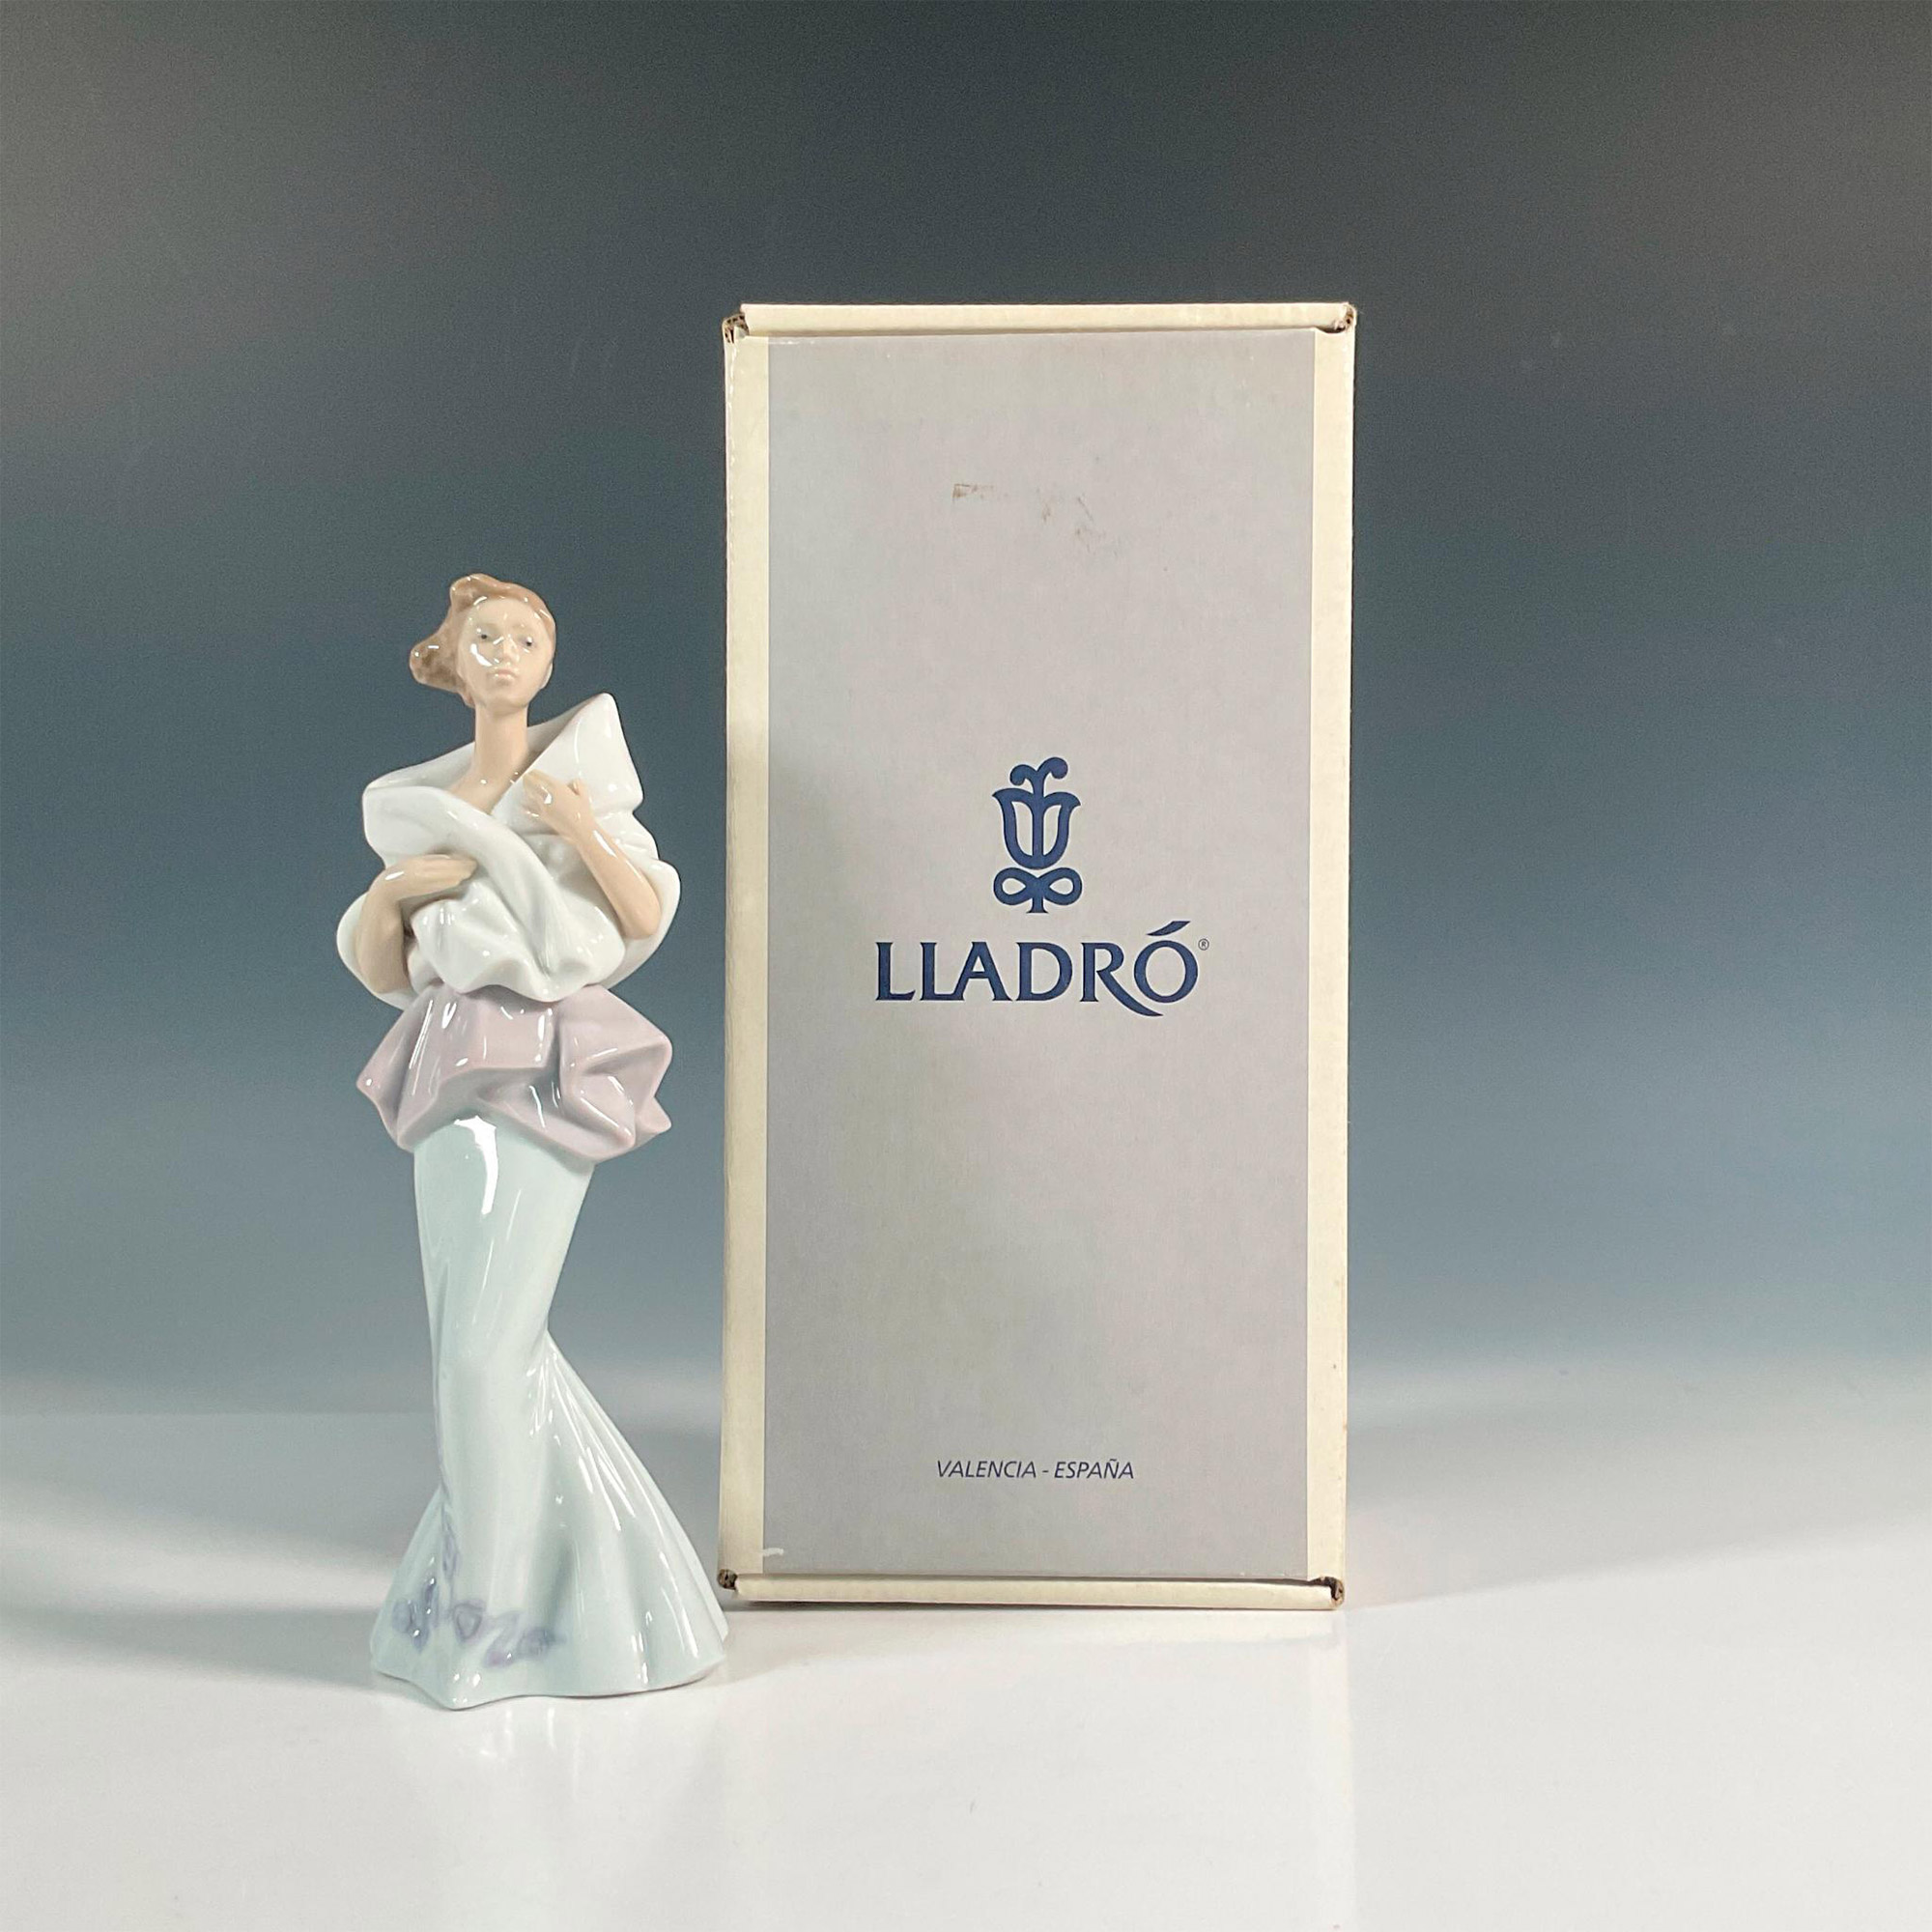 A Night Out 1006594 - Lladro Porcelain Figurine - Image 5 of 5